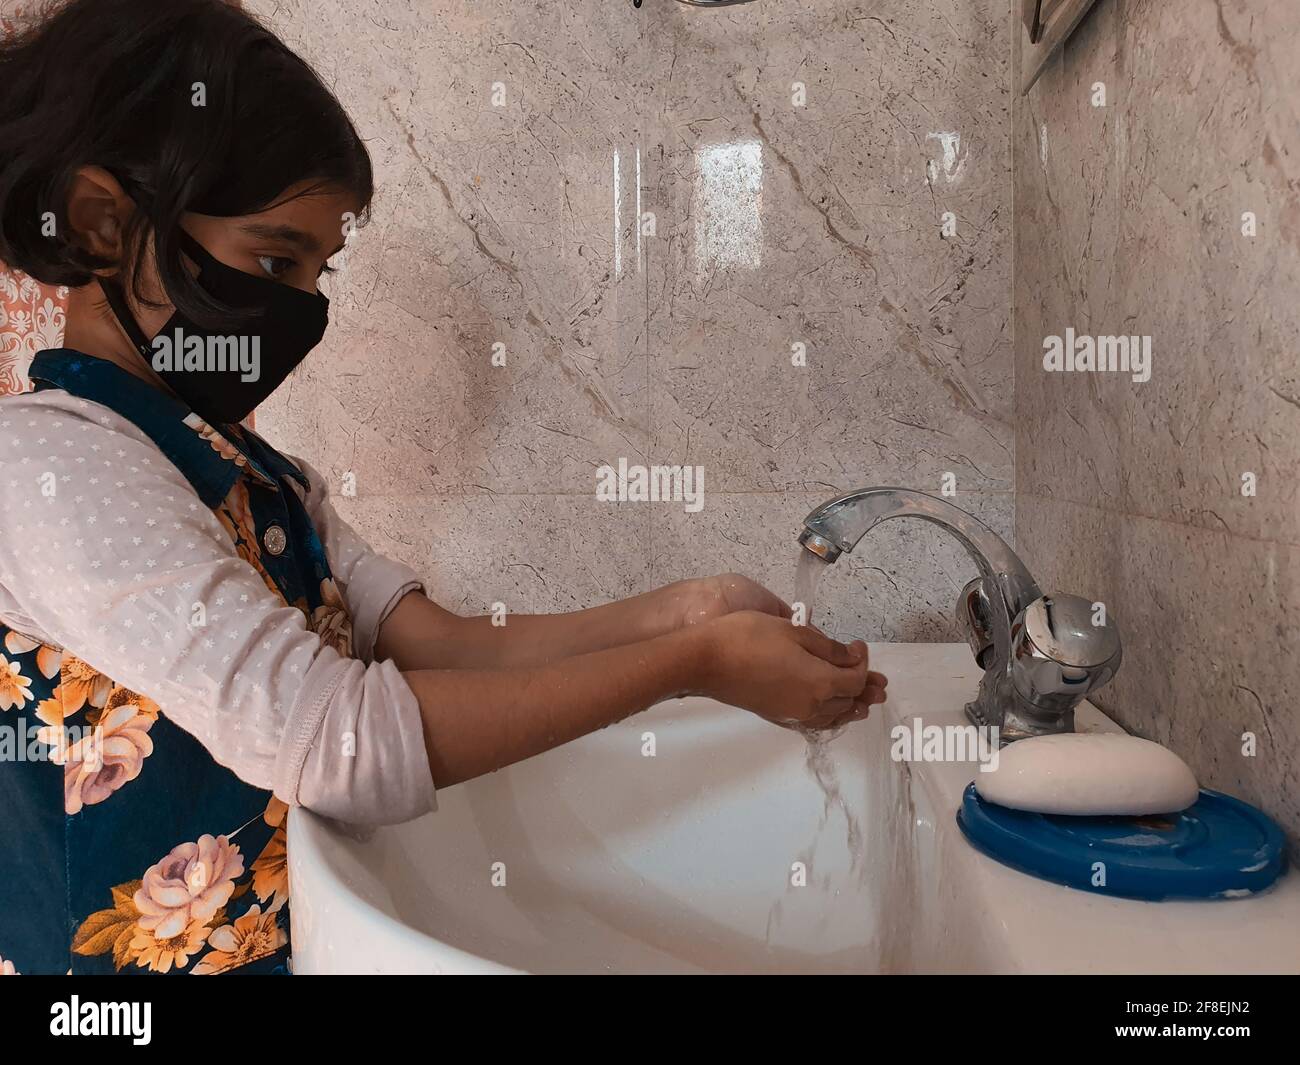 Image of Washing Hands In Bathroom By Masked Children During